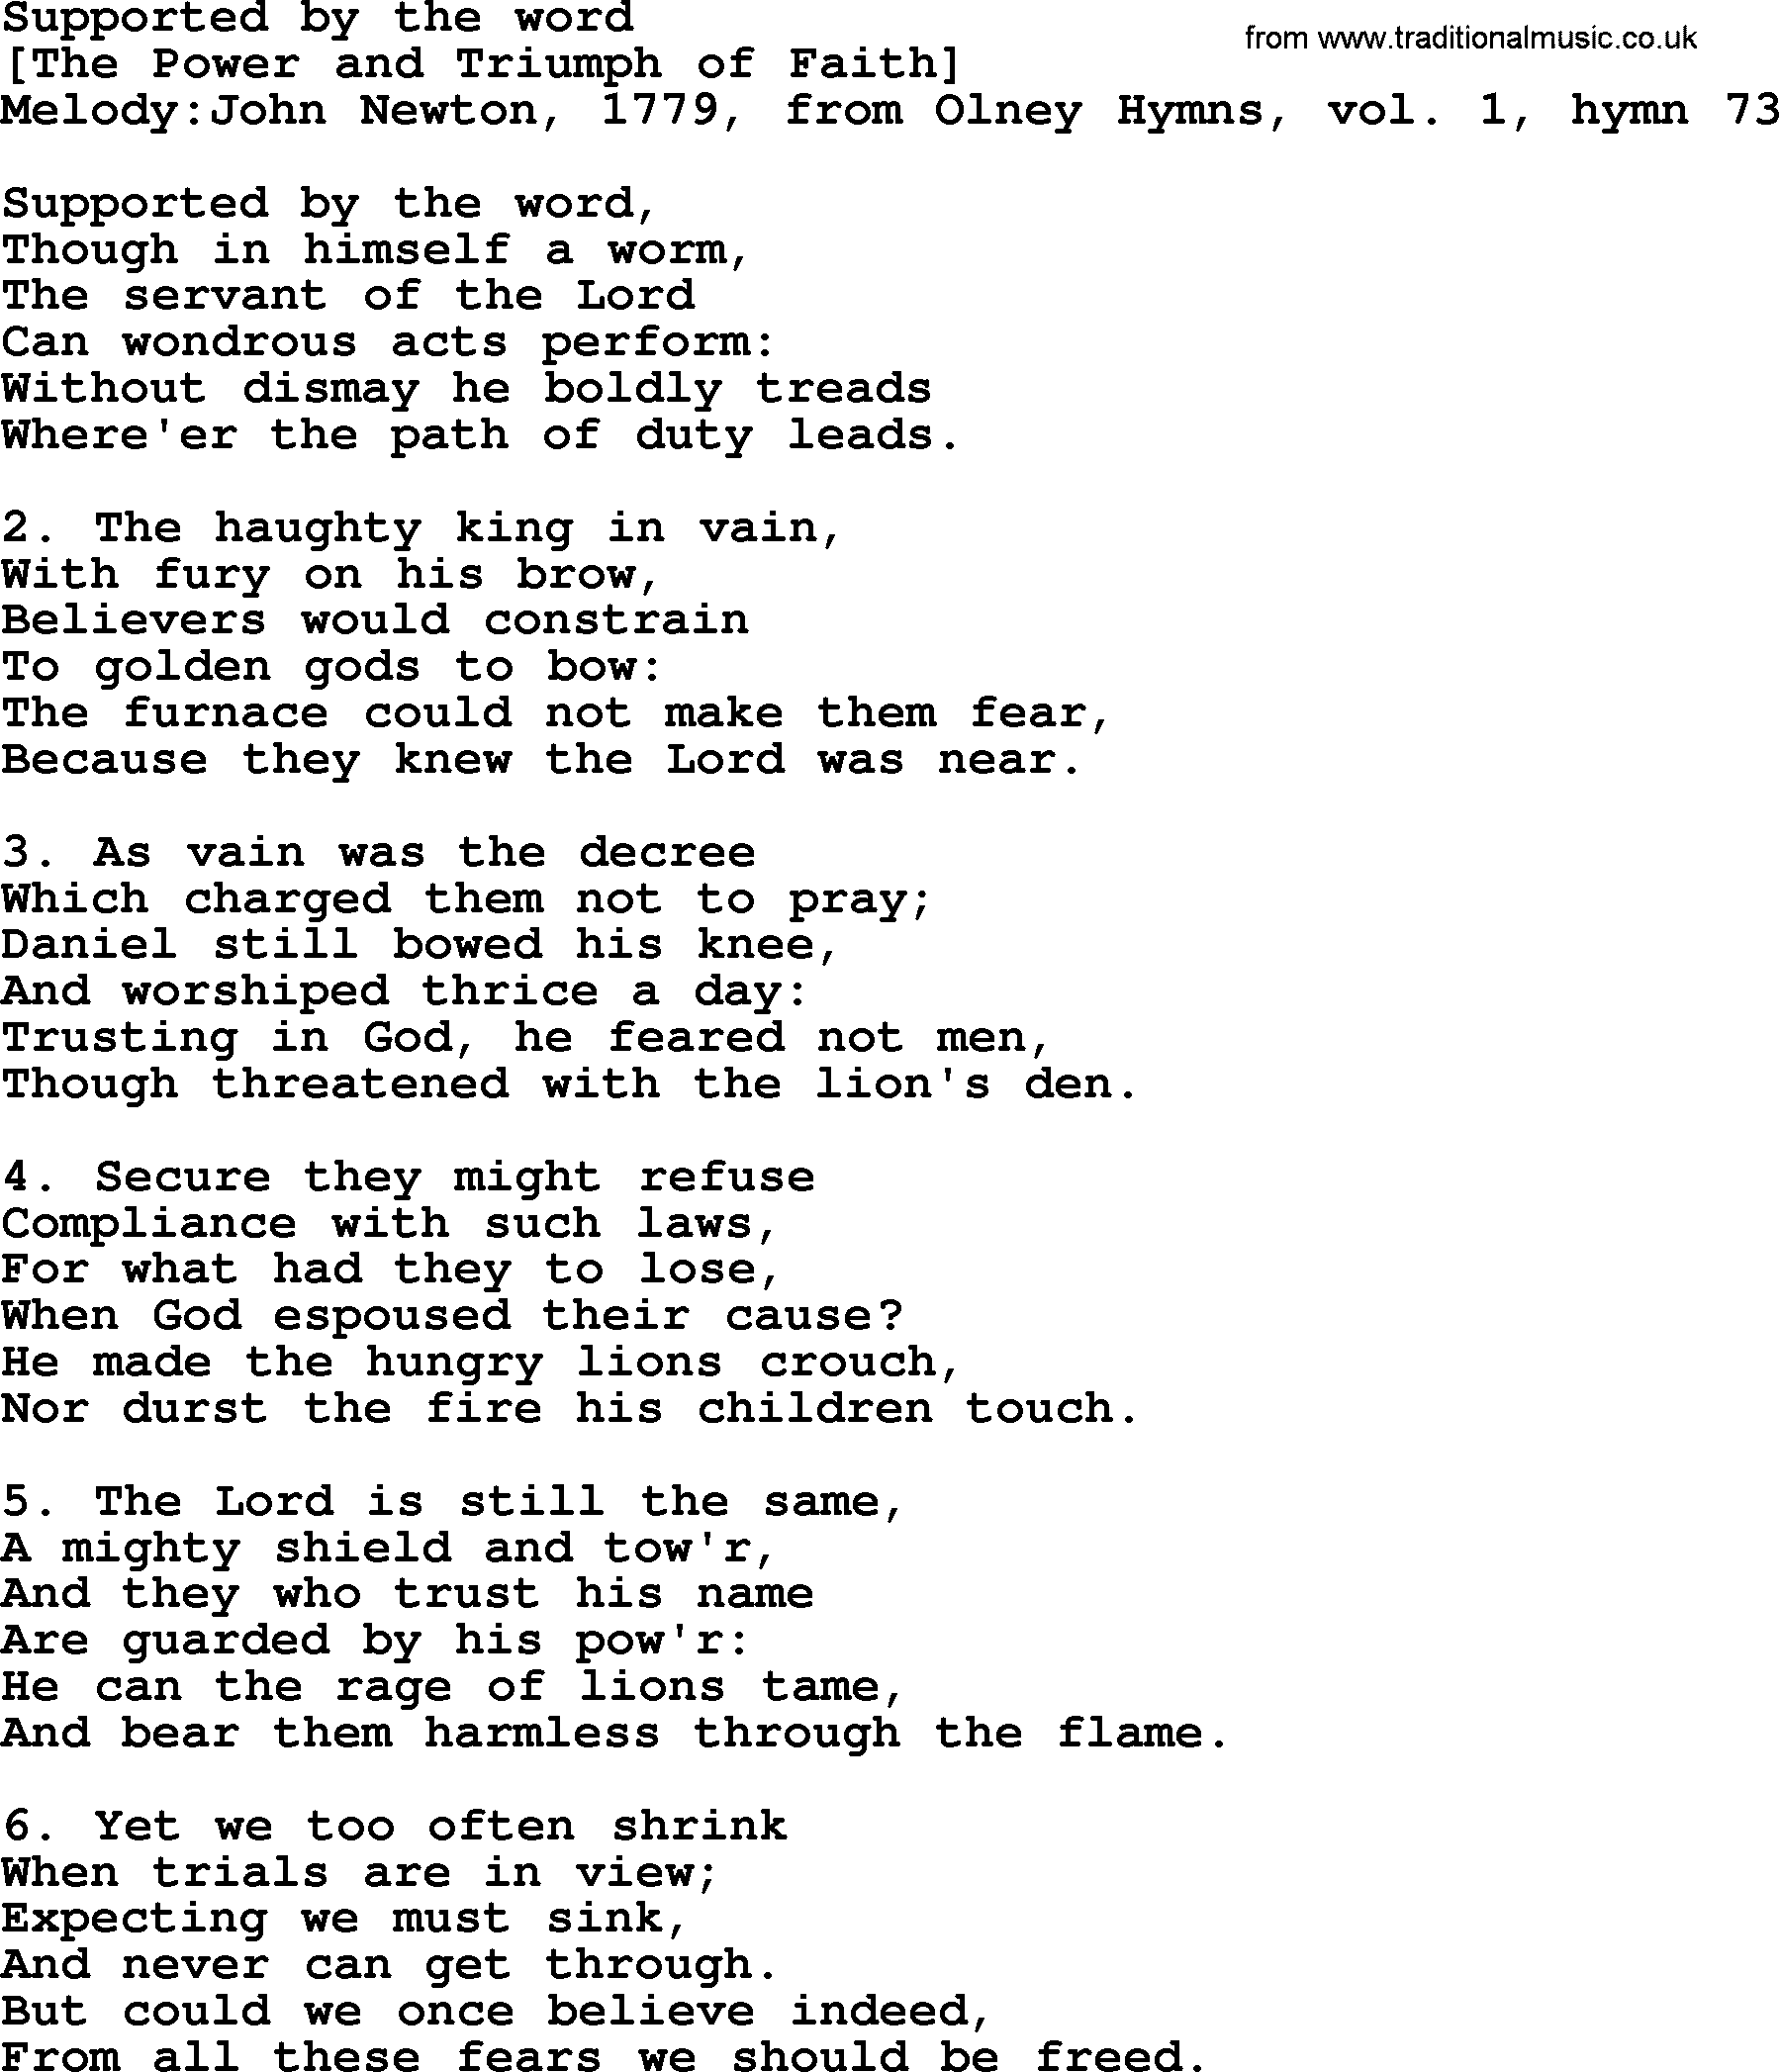 Old English Song: Supported By The Word lyrics